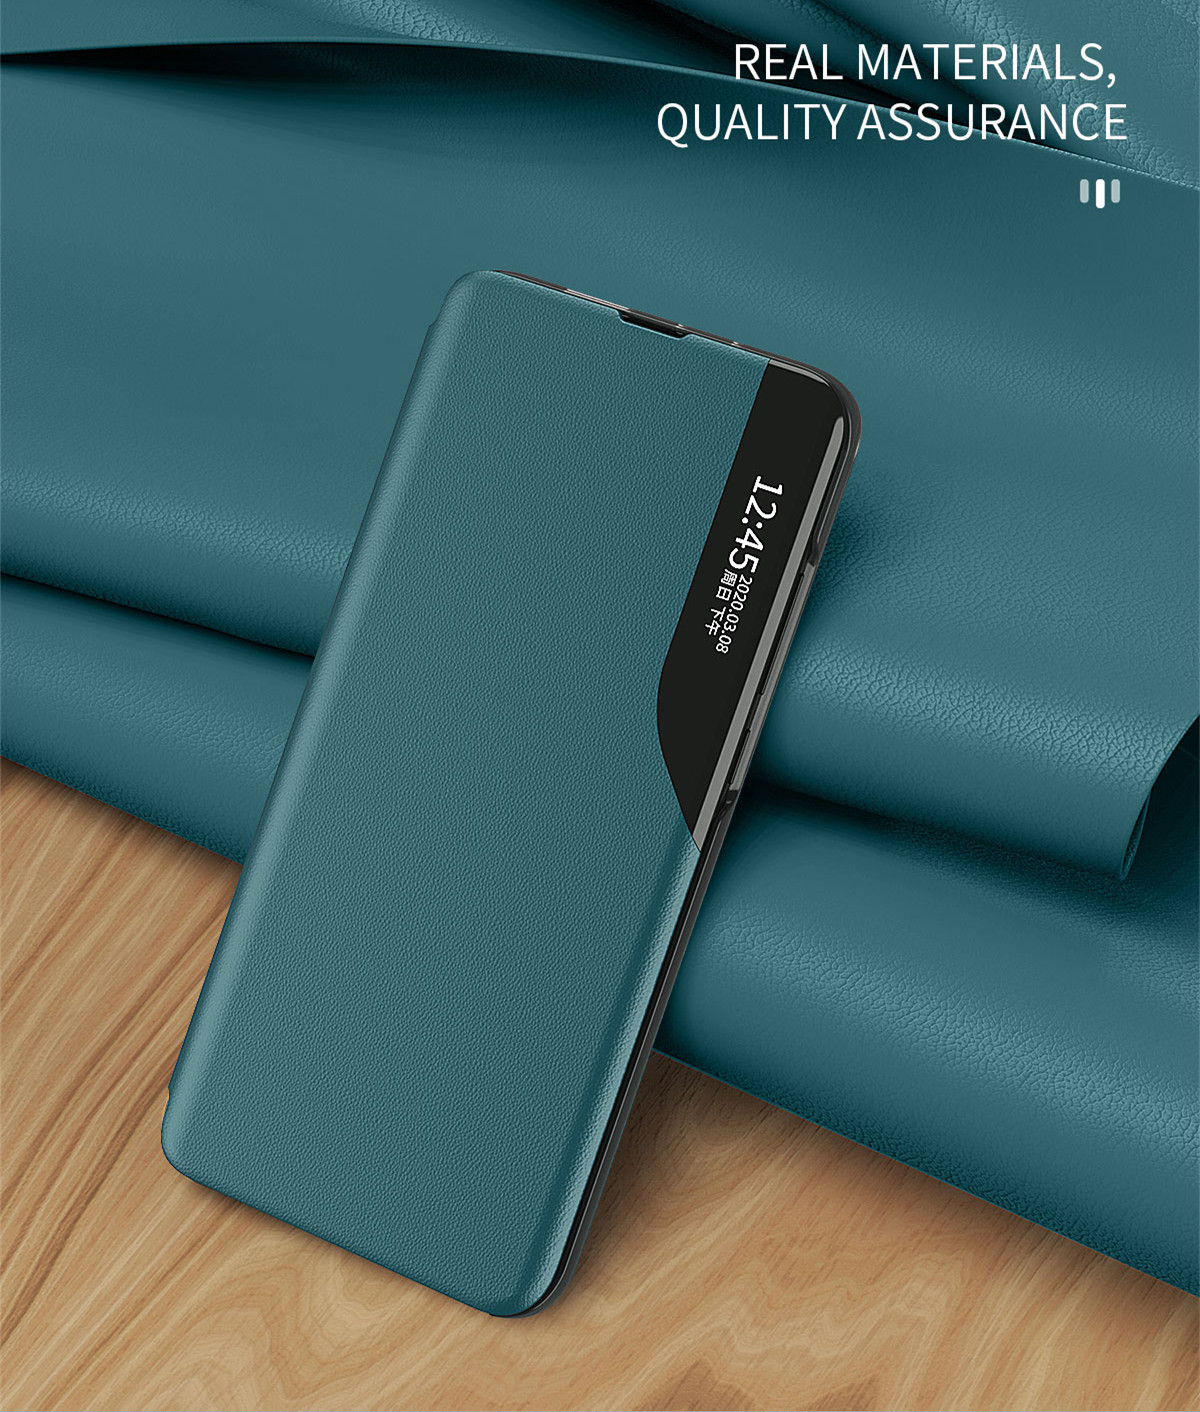 Bakeey-Magnetic-Flip-with-Stand-Shockproof-PU-Leather-Full-Cover-Protective-Cover-for-Samsung-Galaxy-1742547-6